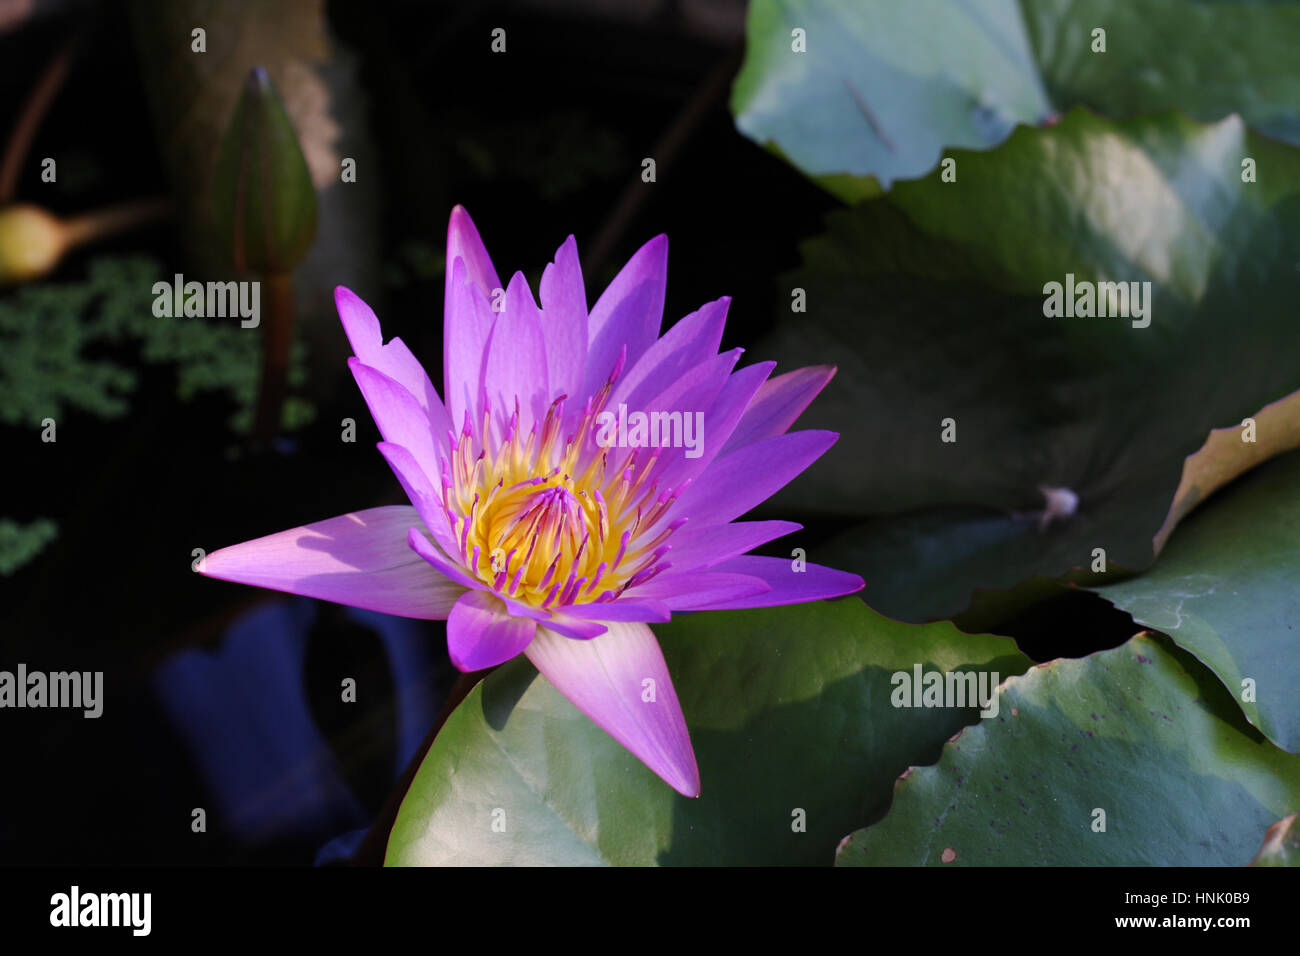 A flower of Nymphaea sp. Stock Photo